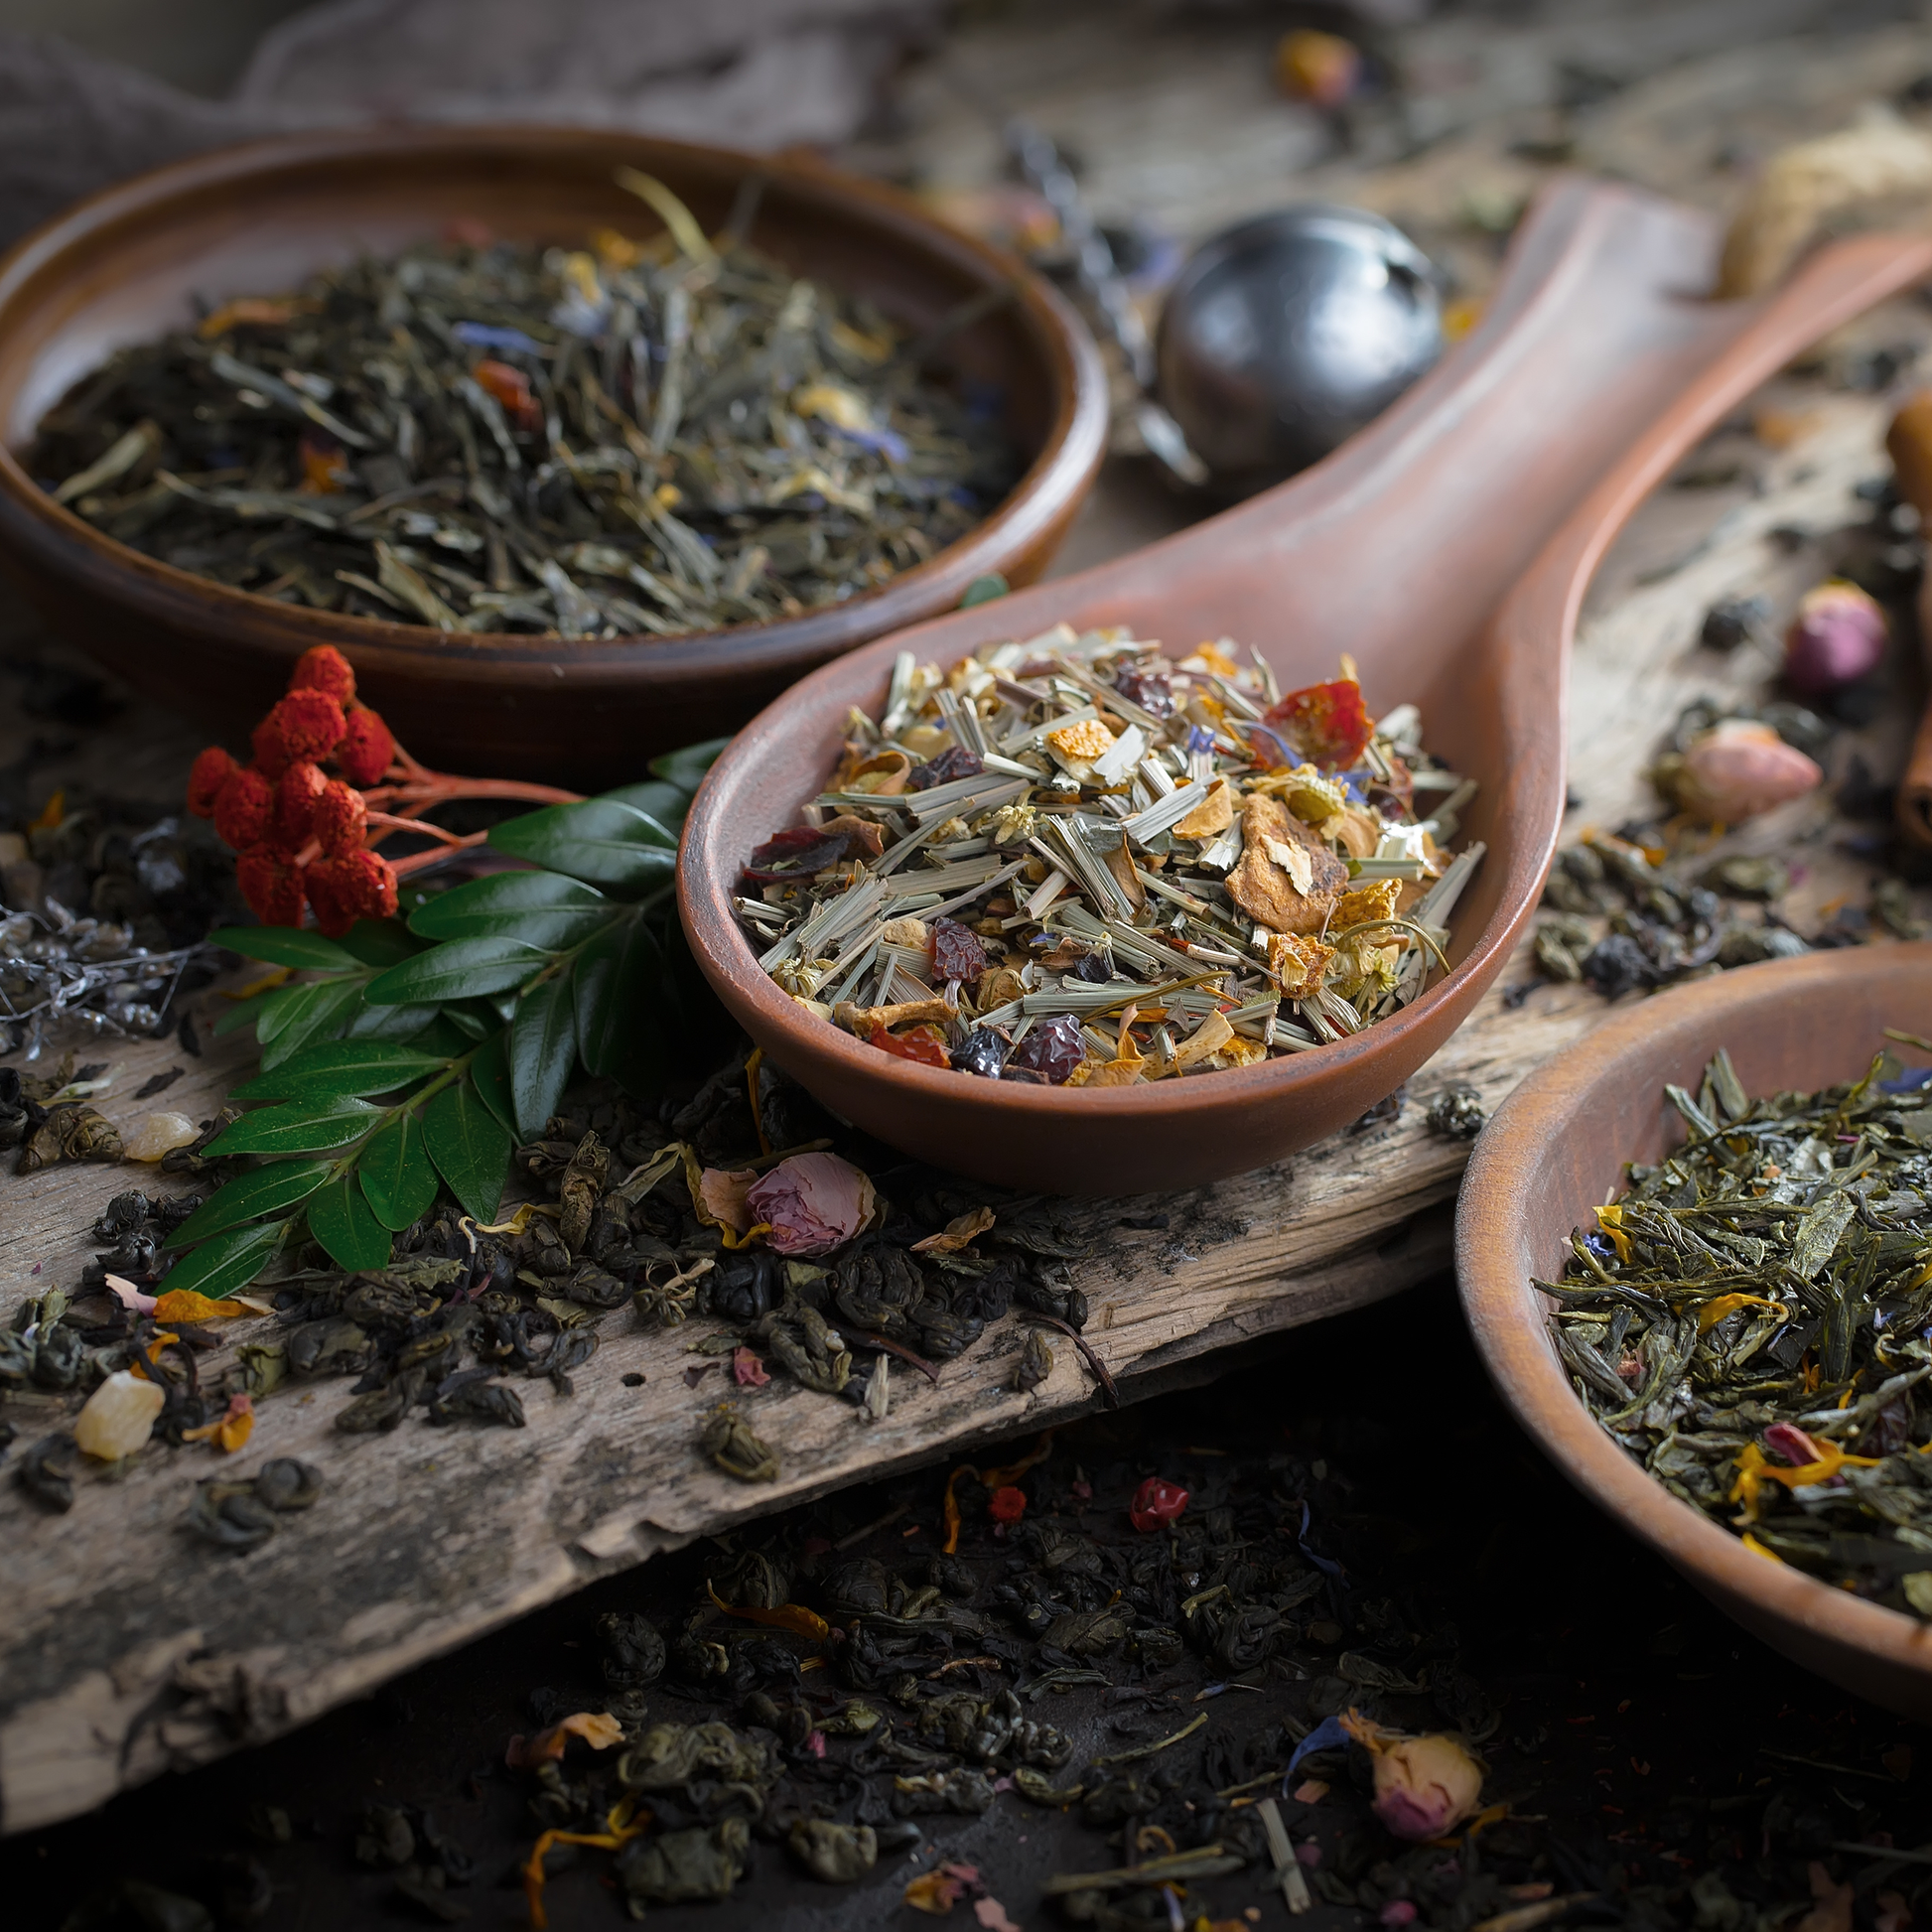 Herbs scattered on a wooden board with some herbs contained in a wooden bowl and a wooden spoon.